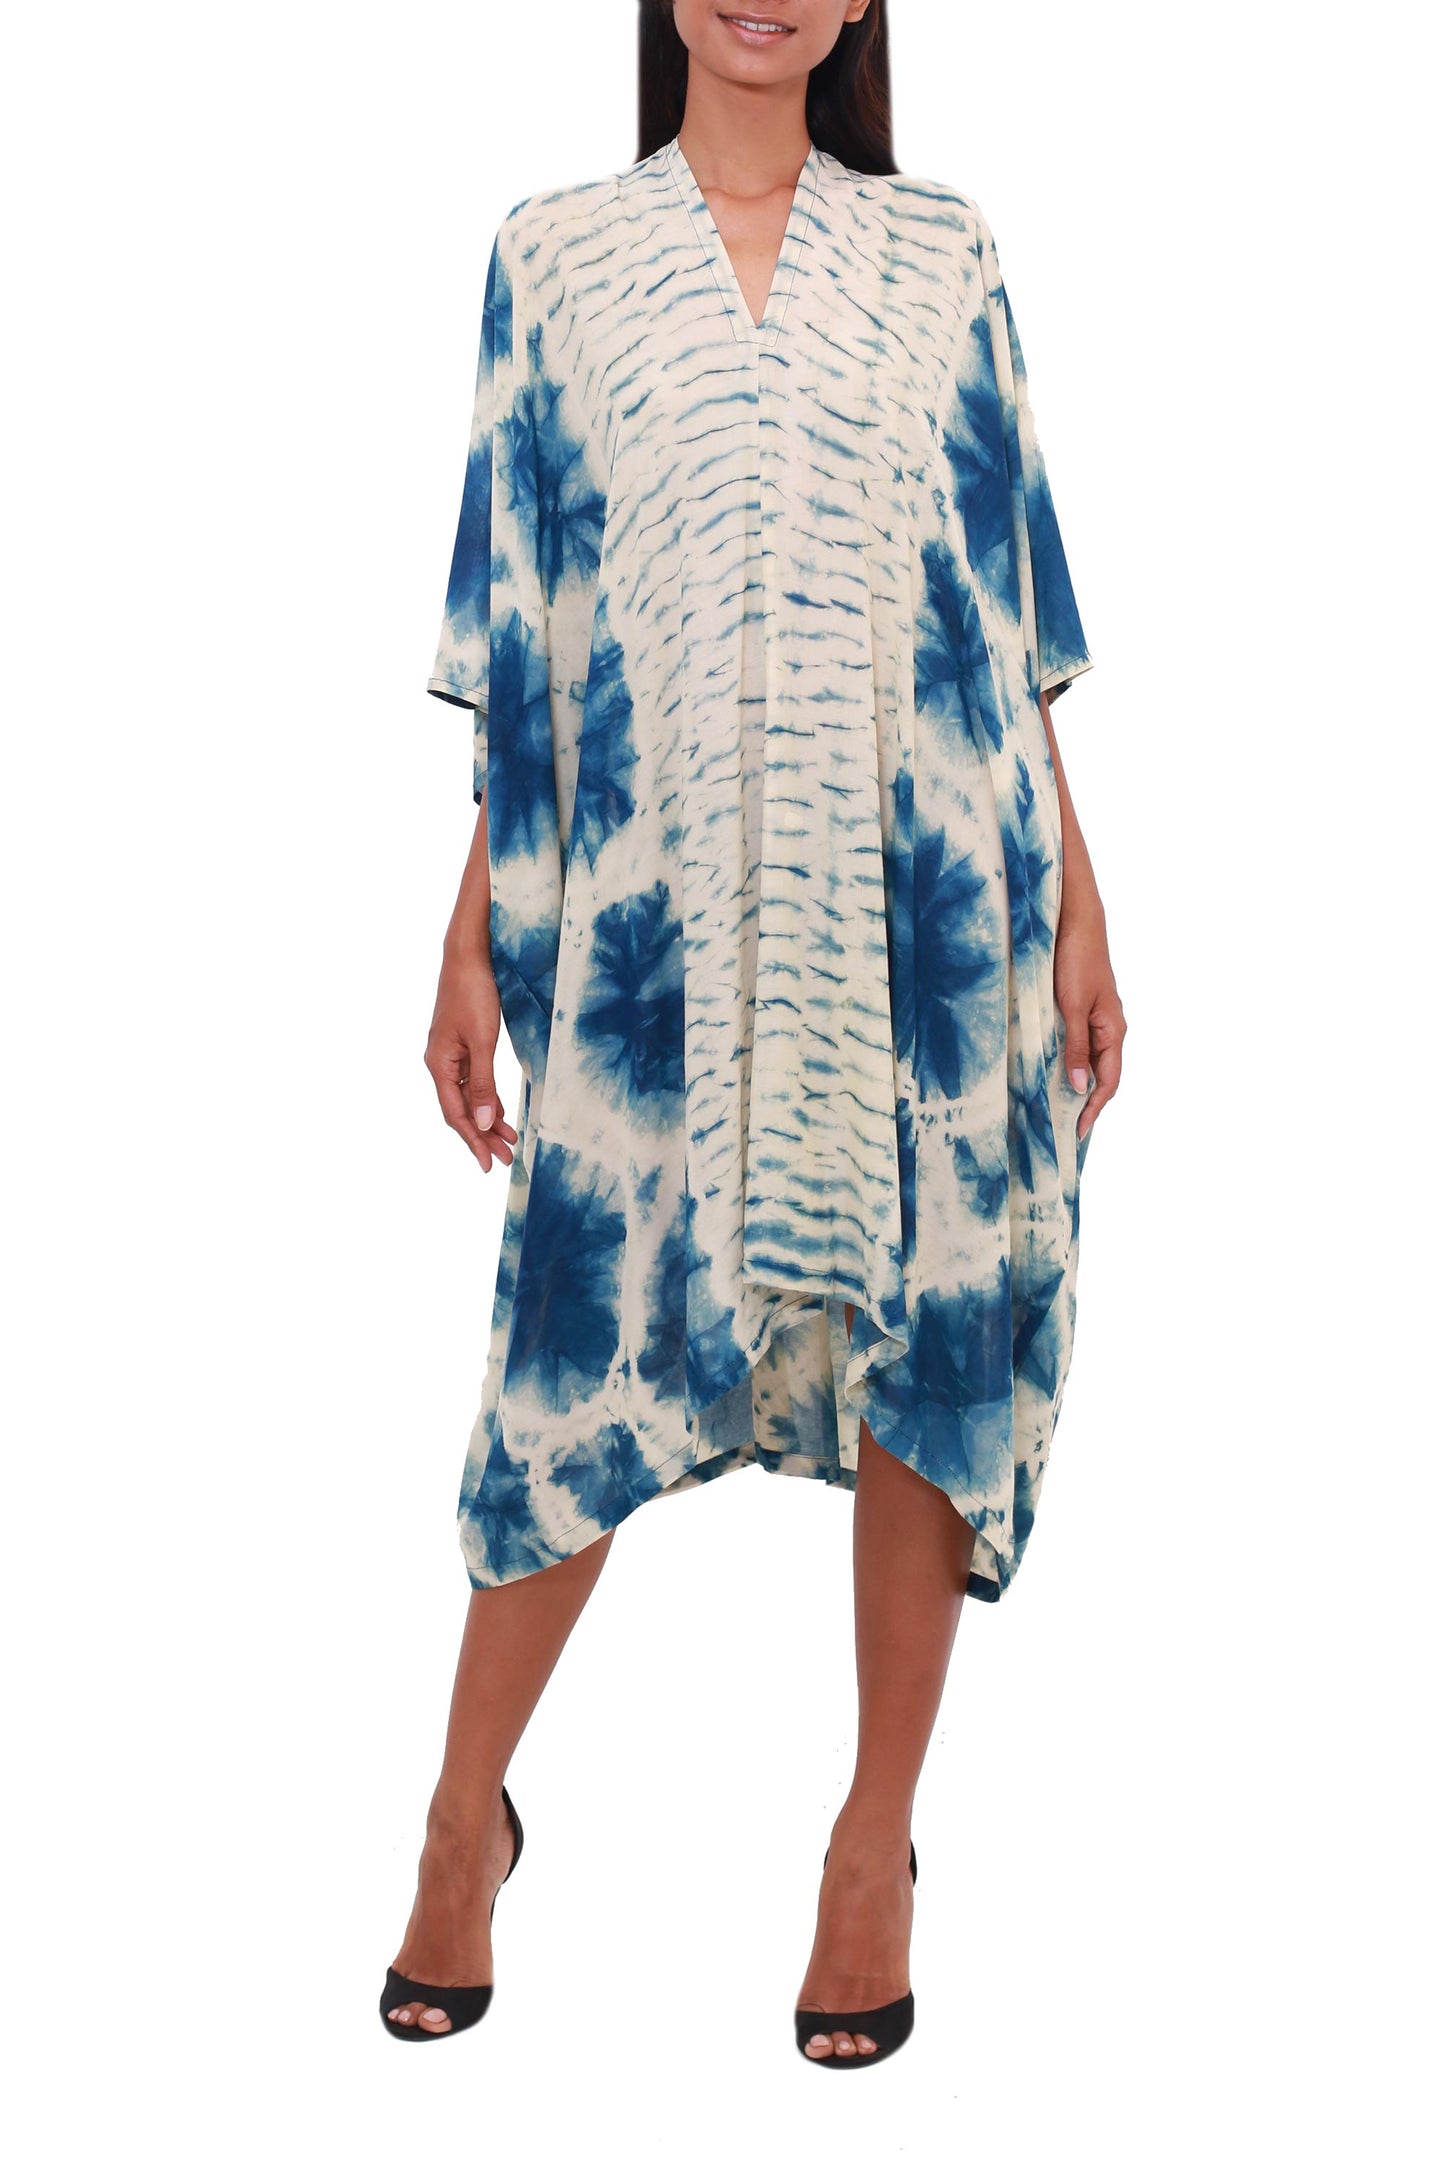 Angin Segara Oceanic Tie-Dyed Rayon Caftan Crafted in Java